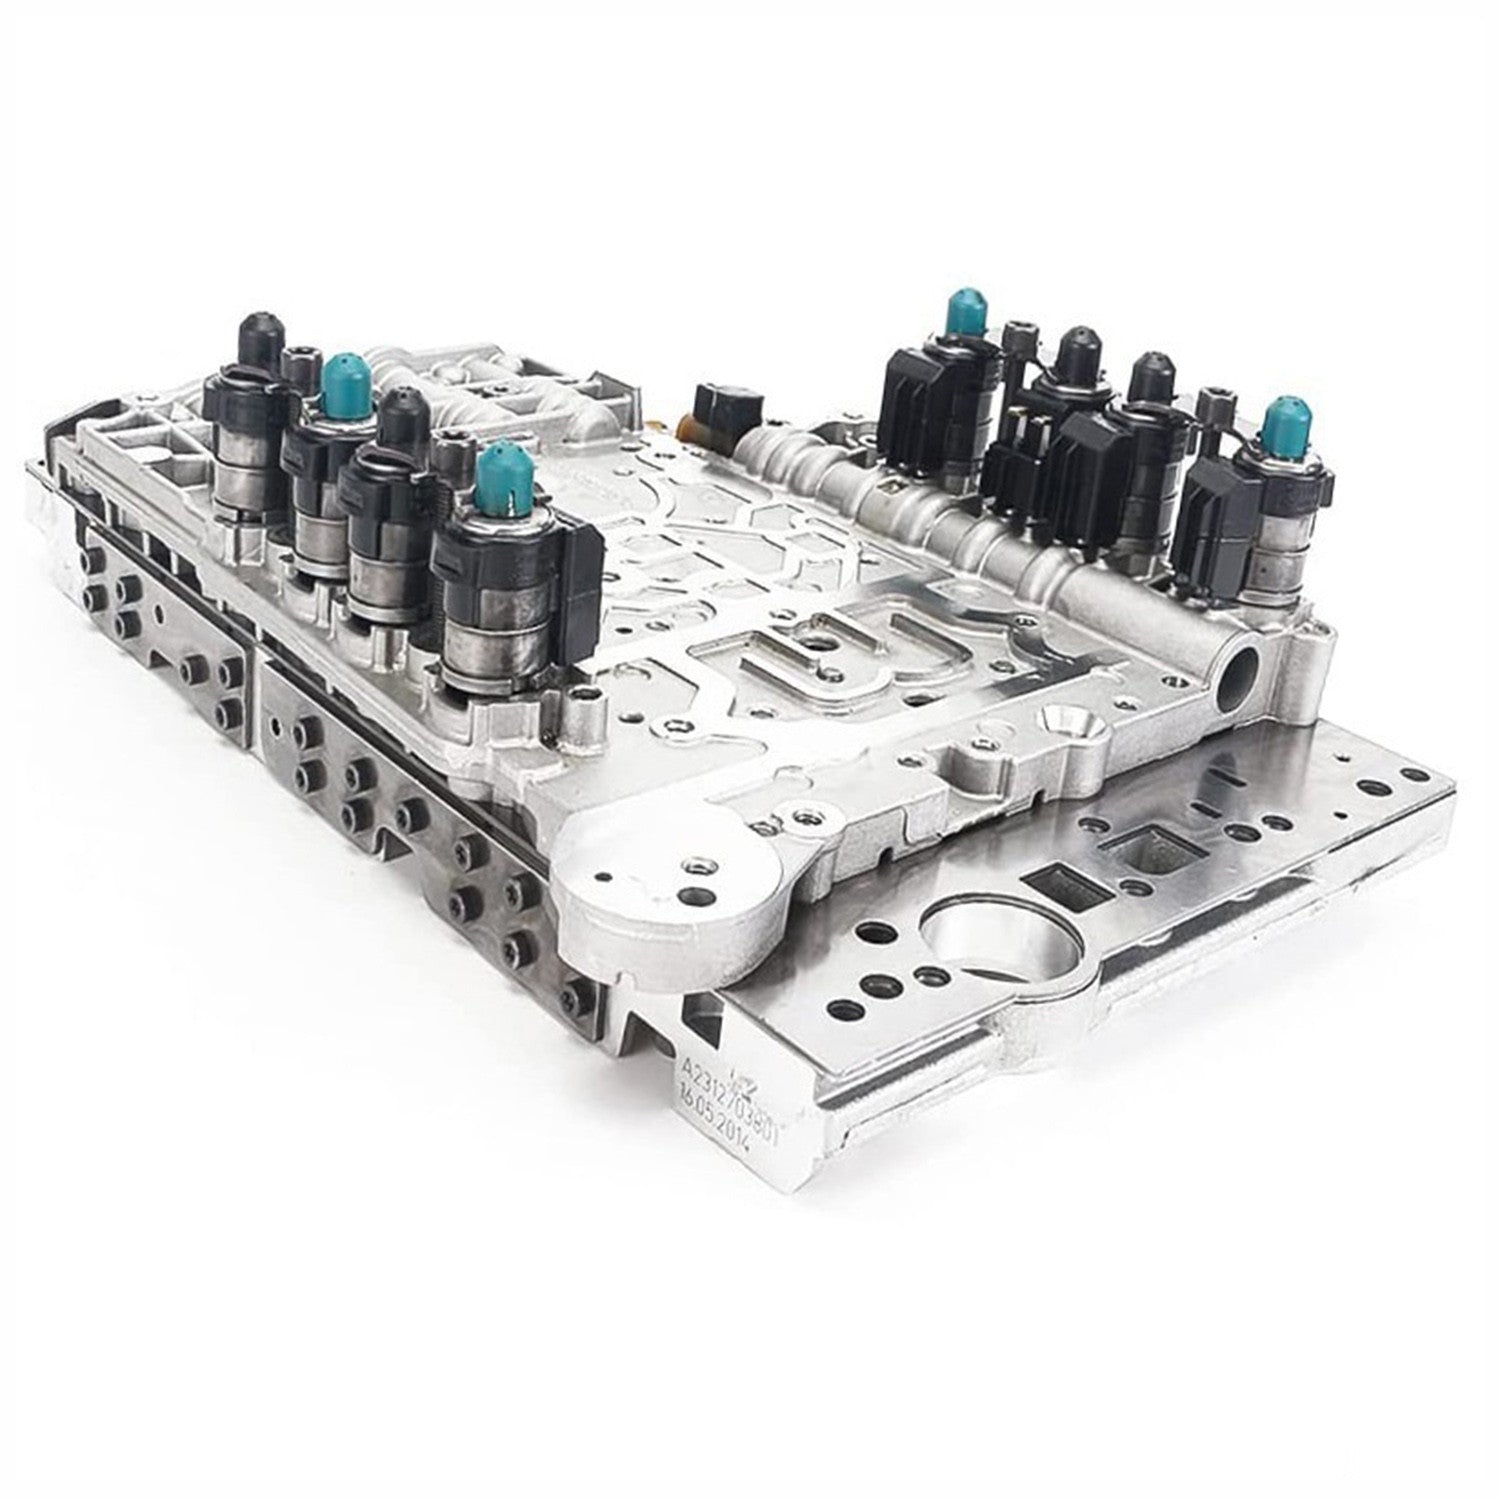 Transmission-Valve-body-ission-Control-Unit-Conand-Transmductor-Plate-722.9-Board-2-A0335457332-A0034460310 -Mercedes-CL550-ML350-Daysyore